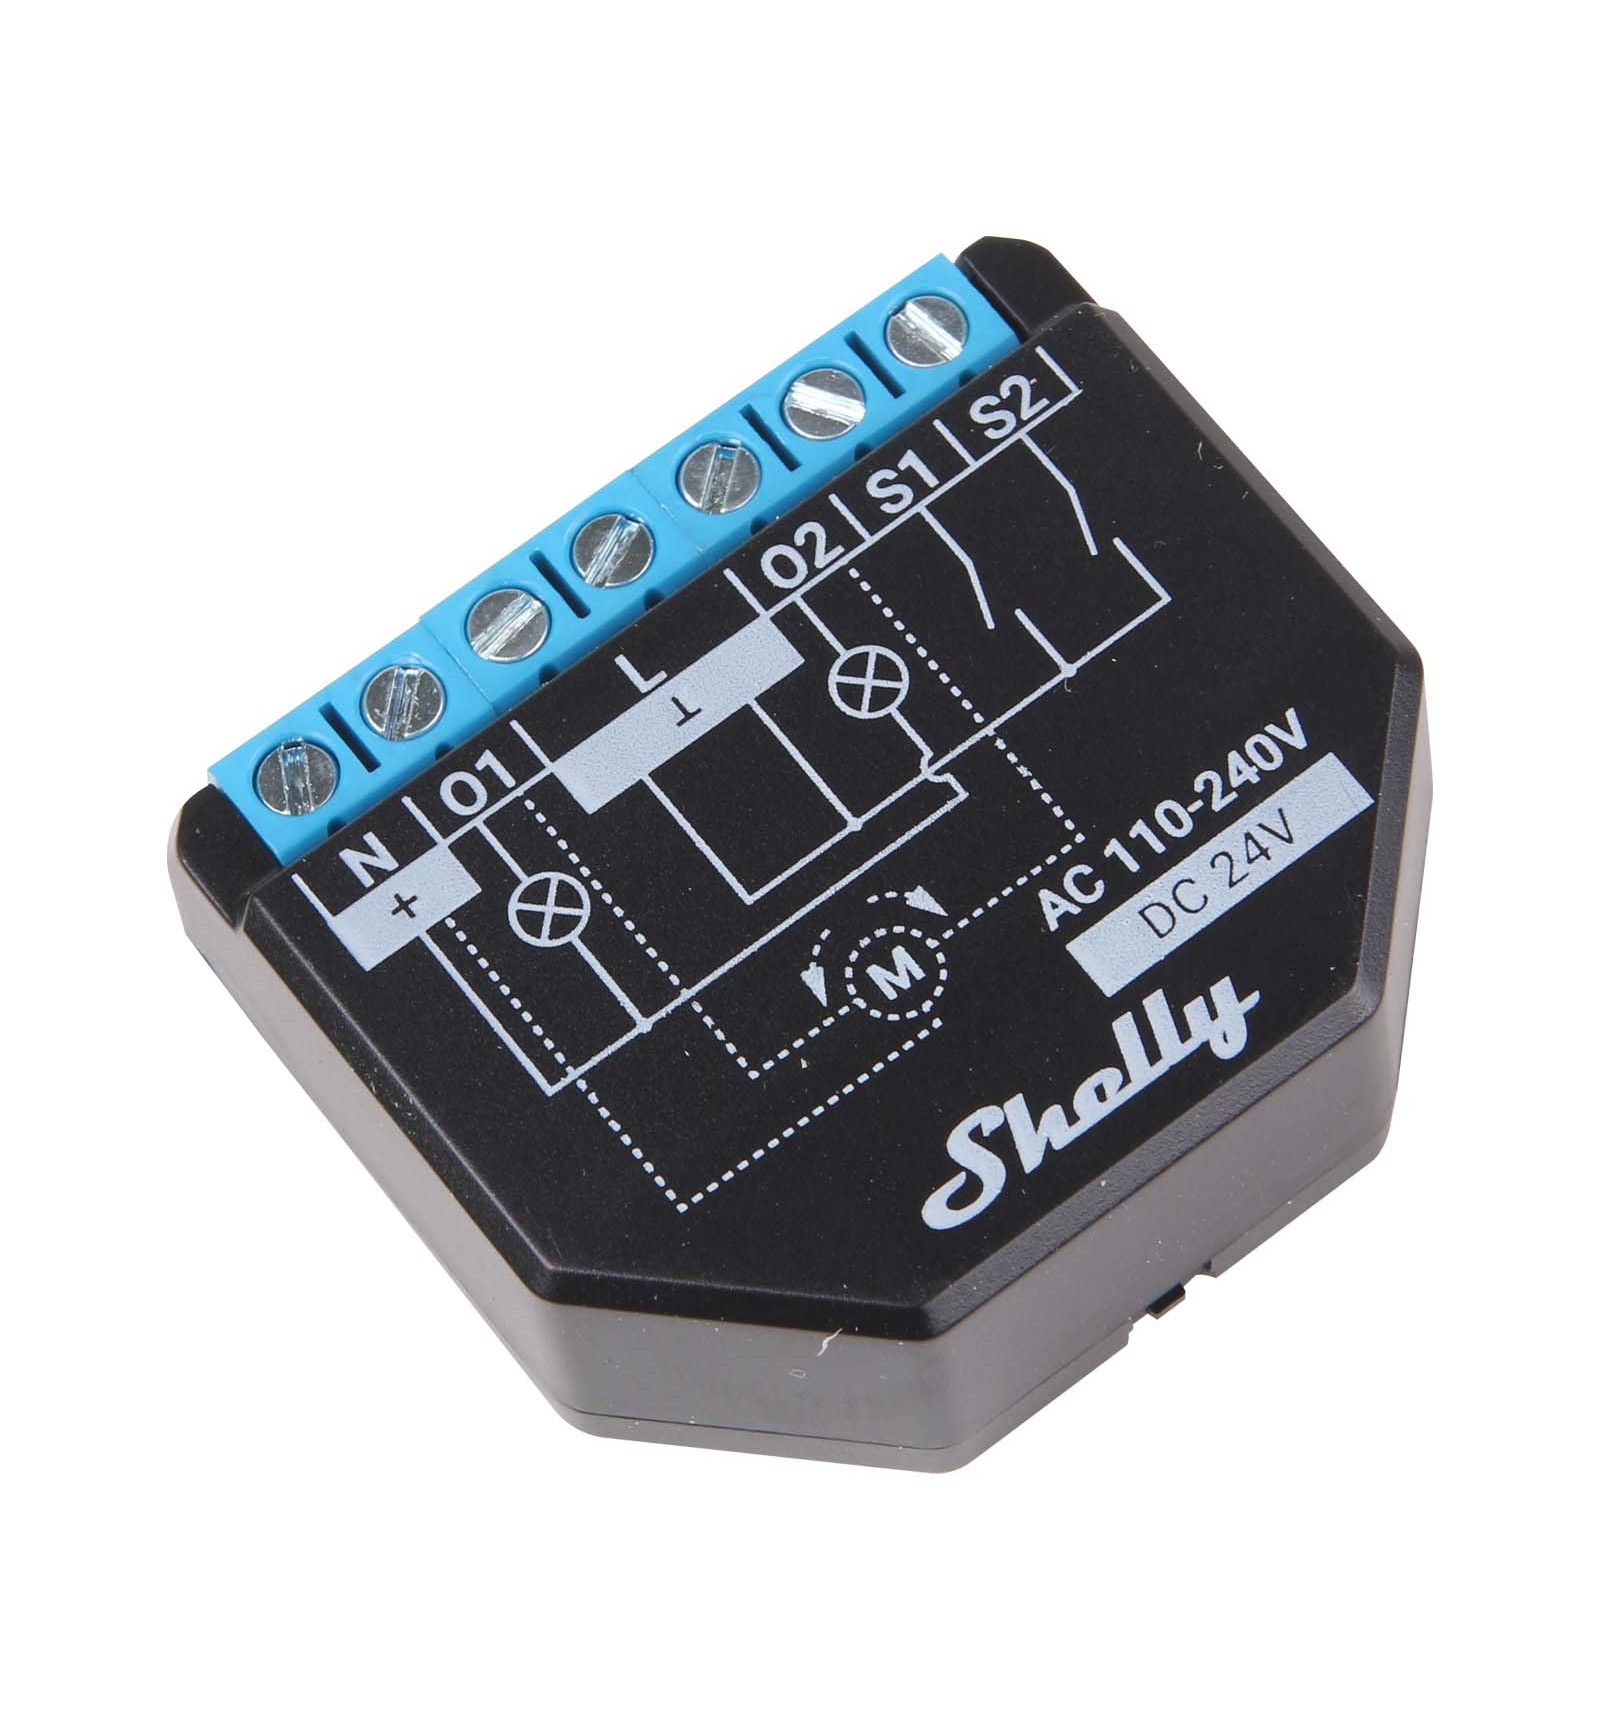 Shelly Plus 2PM 2 channel Wi-Fi relay with power metering an